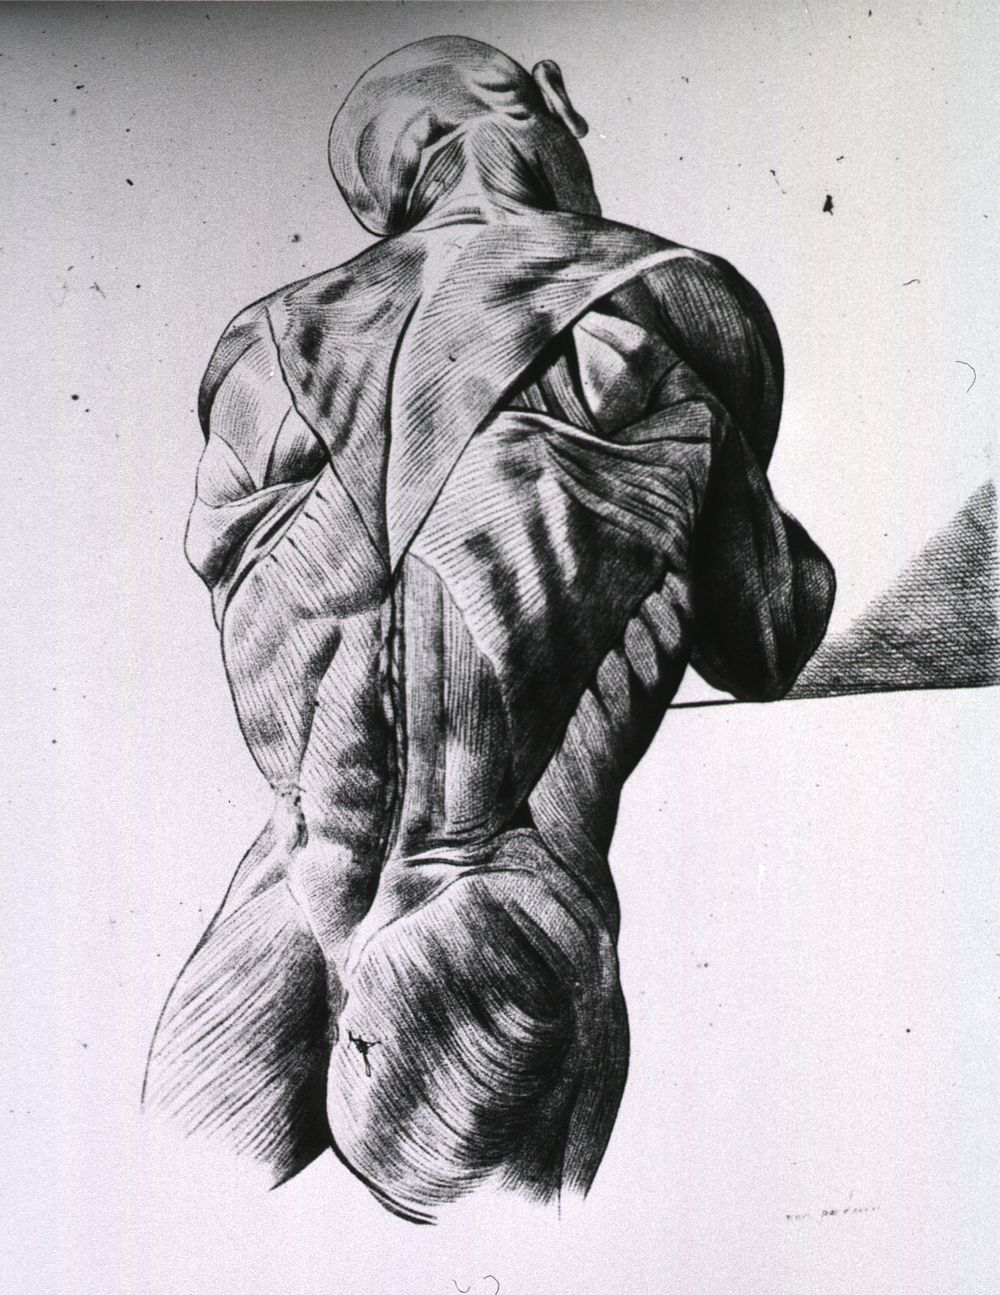 Musculature of the human body, vintage drawing.